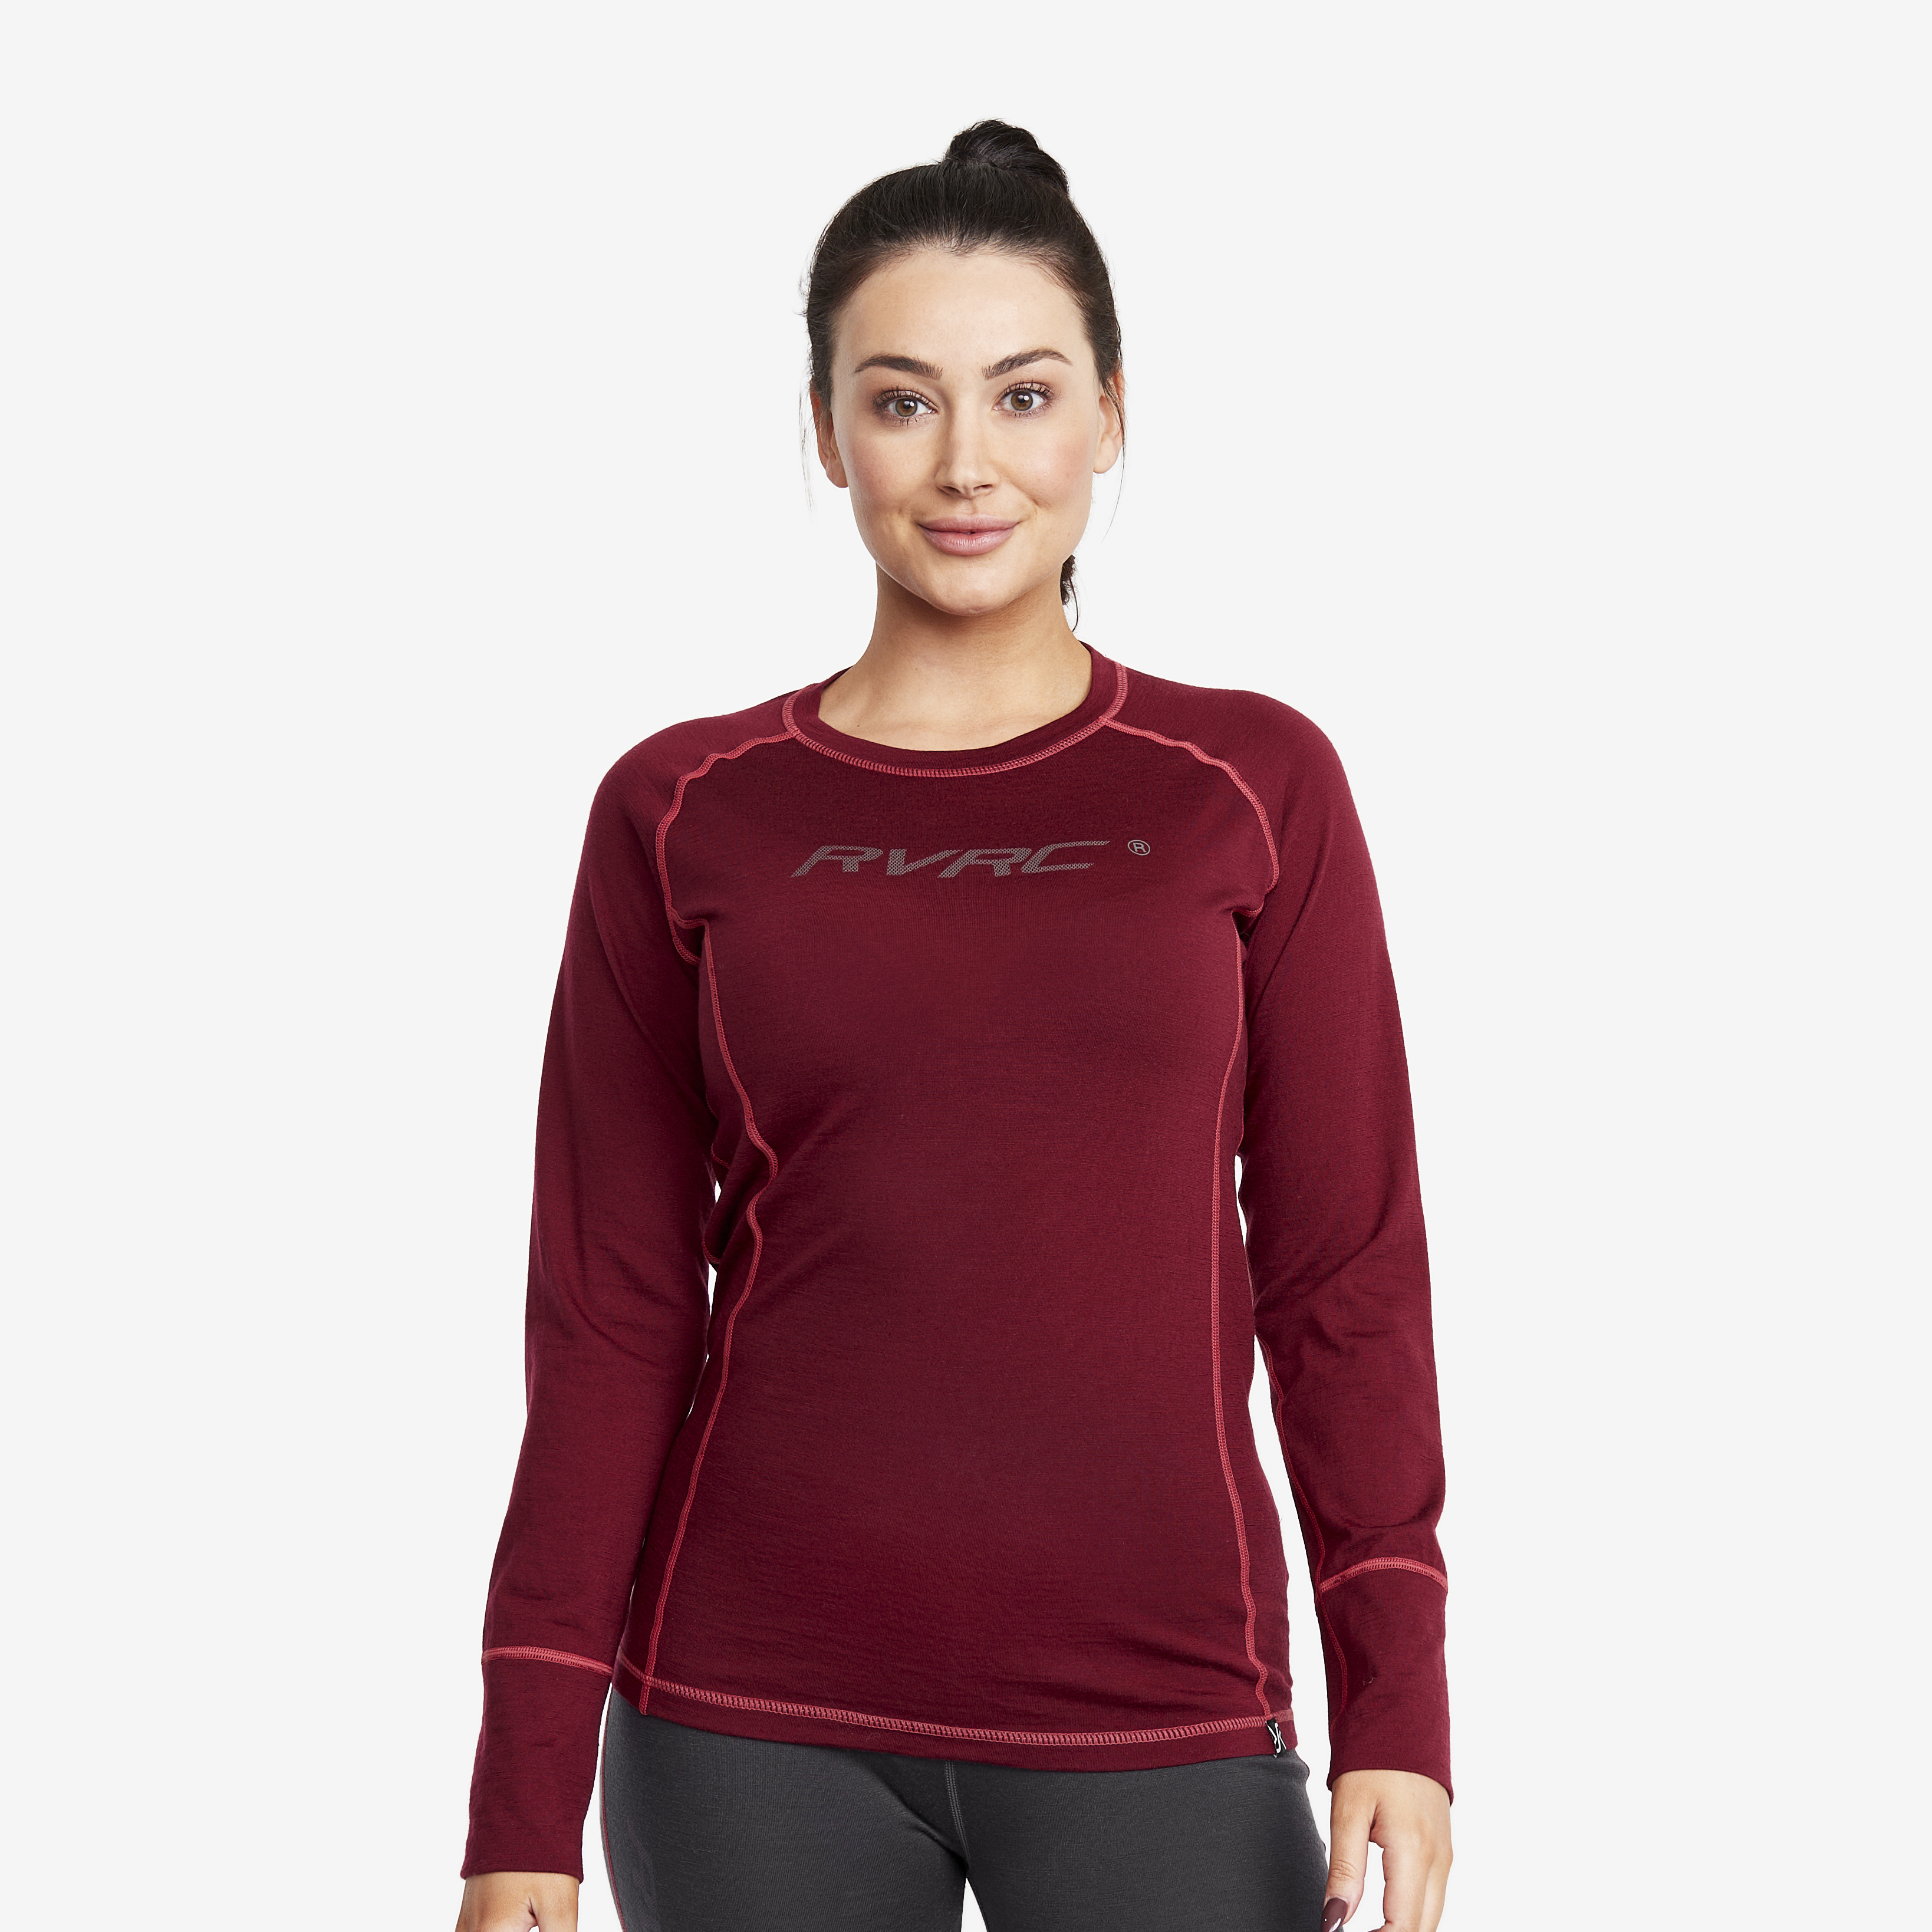 Outright Merino Top Bison Red/ Anthracite Dámské